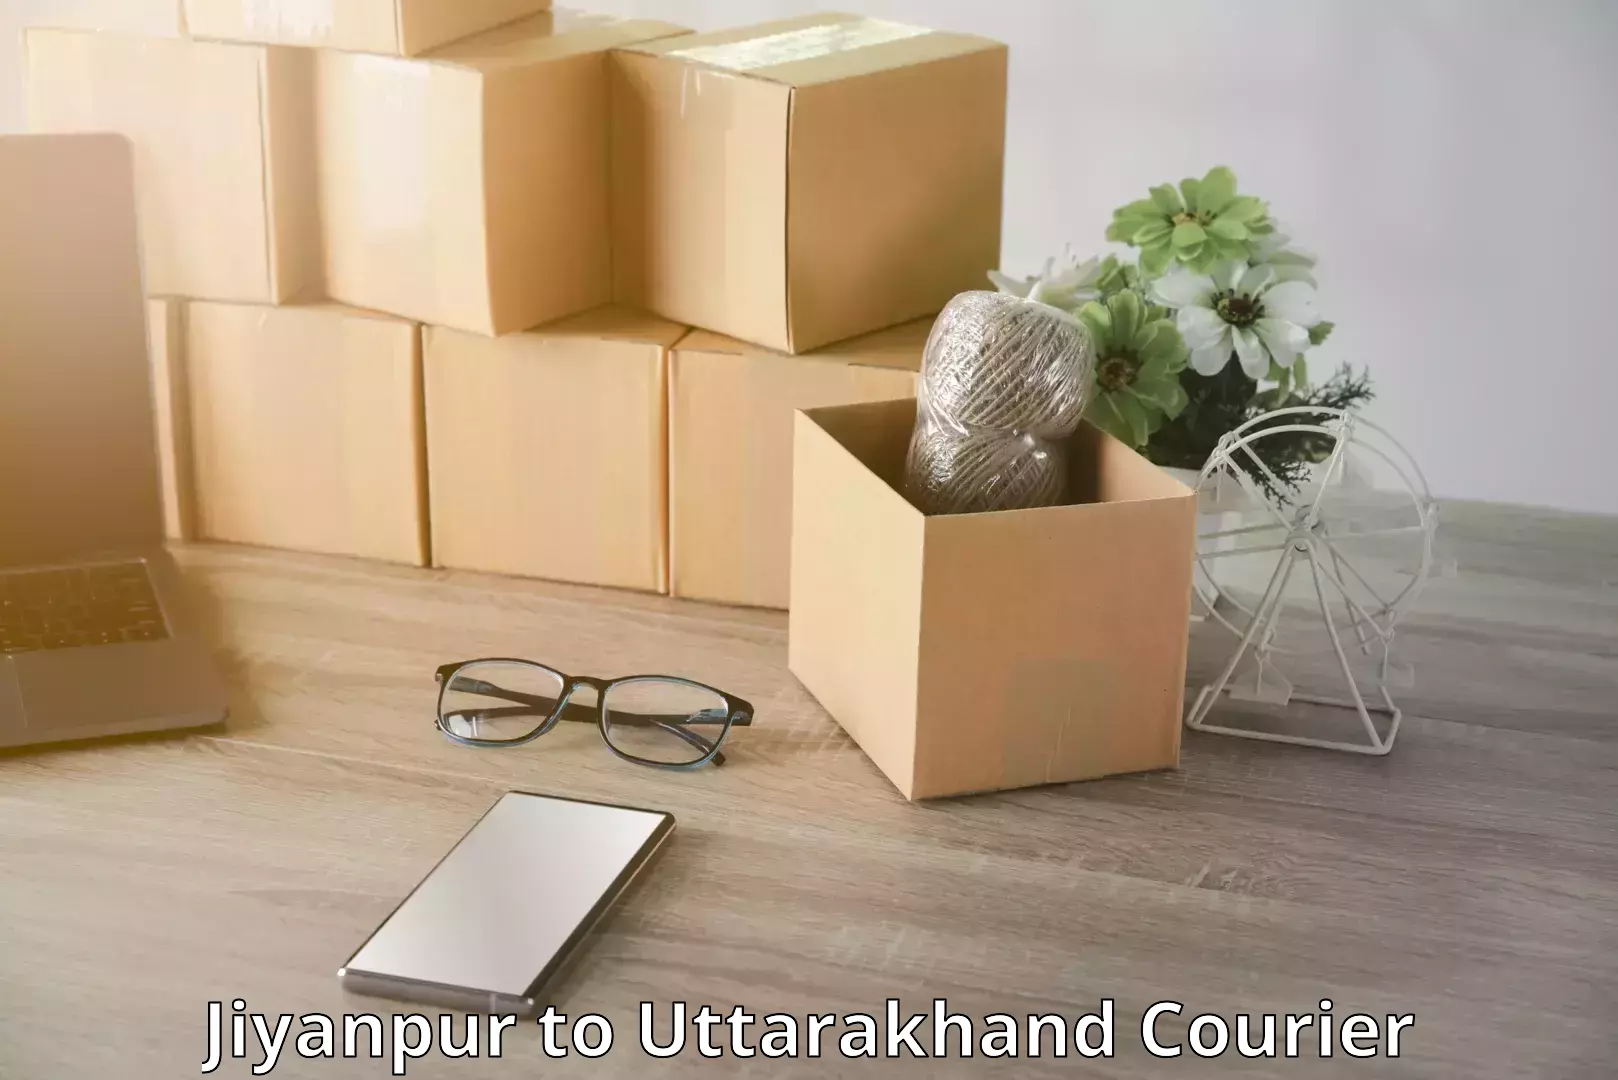 Business luggage transport in Jiyanpur to Uttarakhand